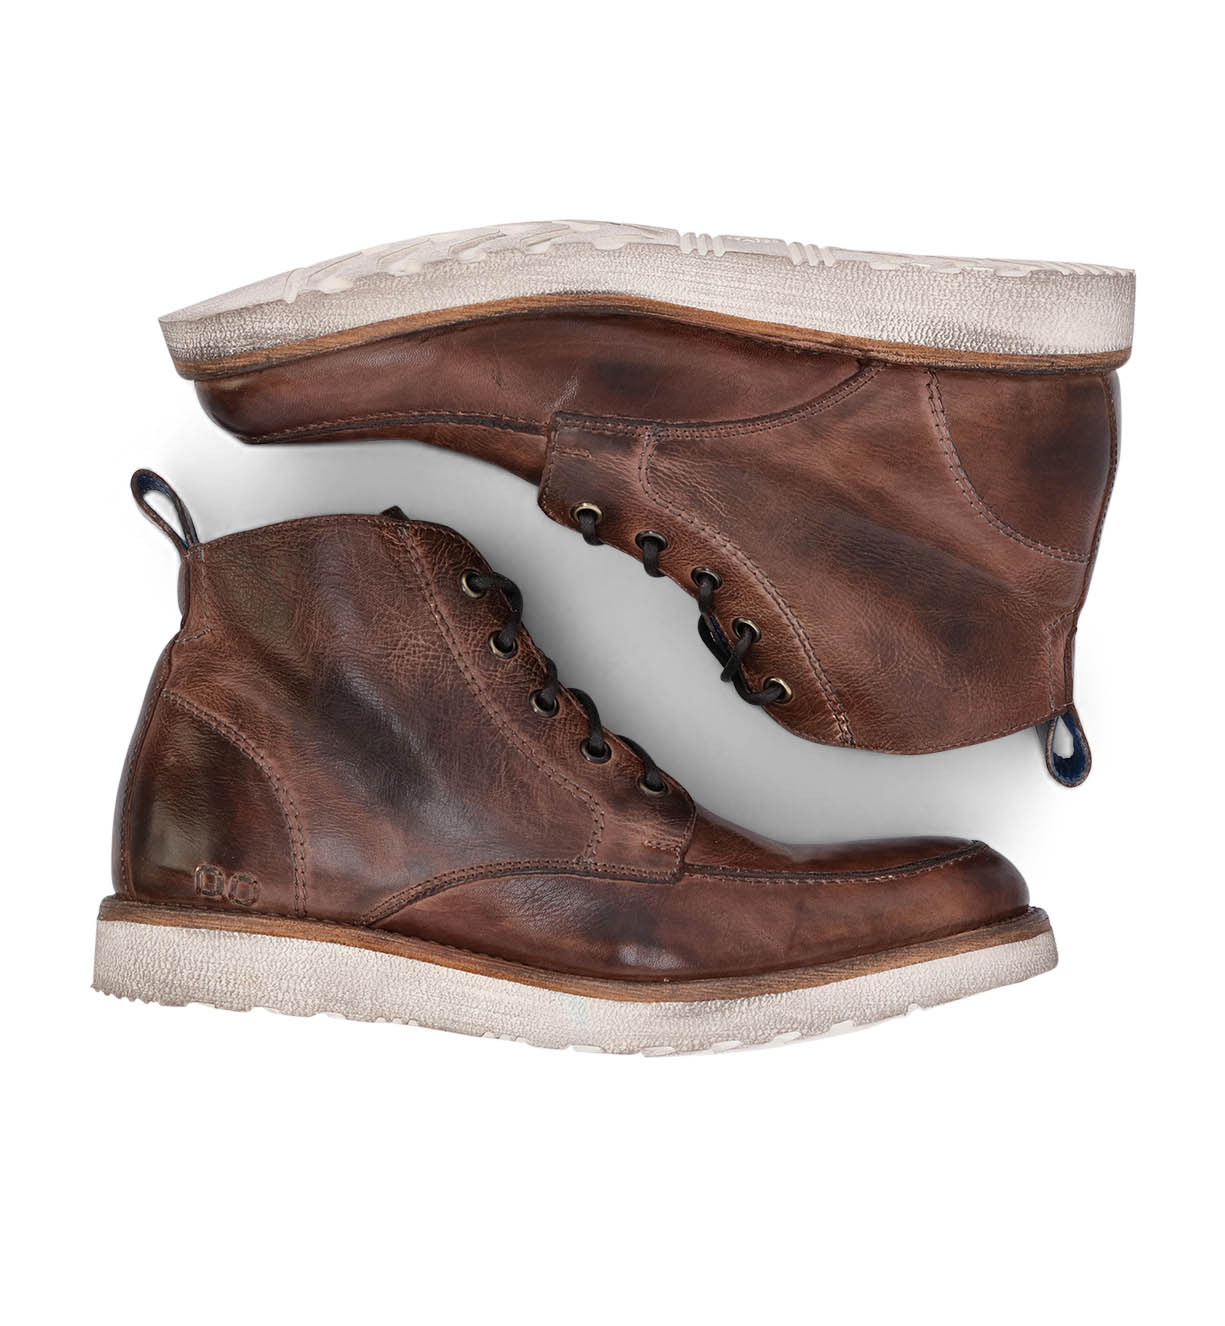 A pair of Bed Stu men's brown leather Lincoln work boots with laces and white soles, isolated on a white background.